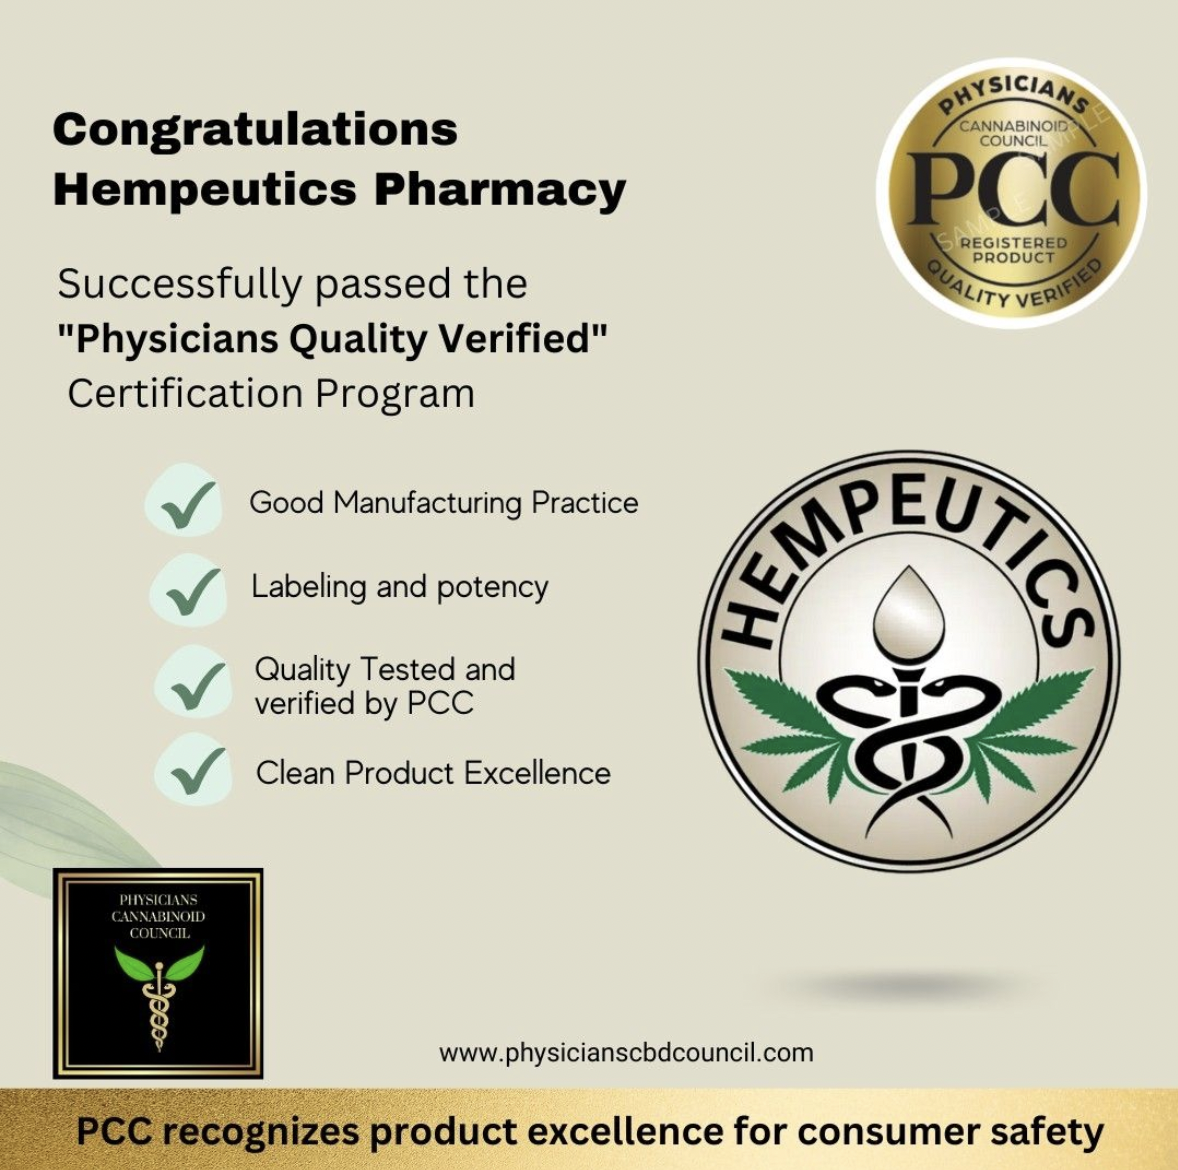 The Physicians Cannabinoid Council Recognizes Hempeutics Pharmacy for Successfully Passing the "Physicians Quality Verified" Certification Program  